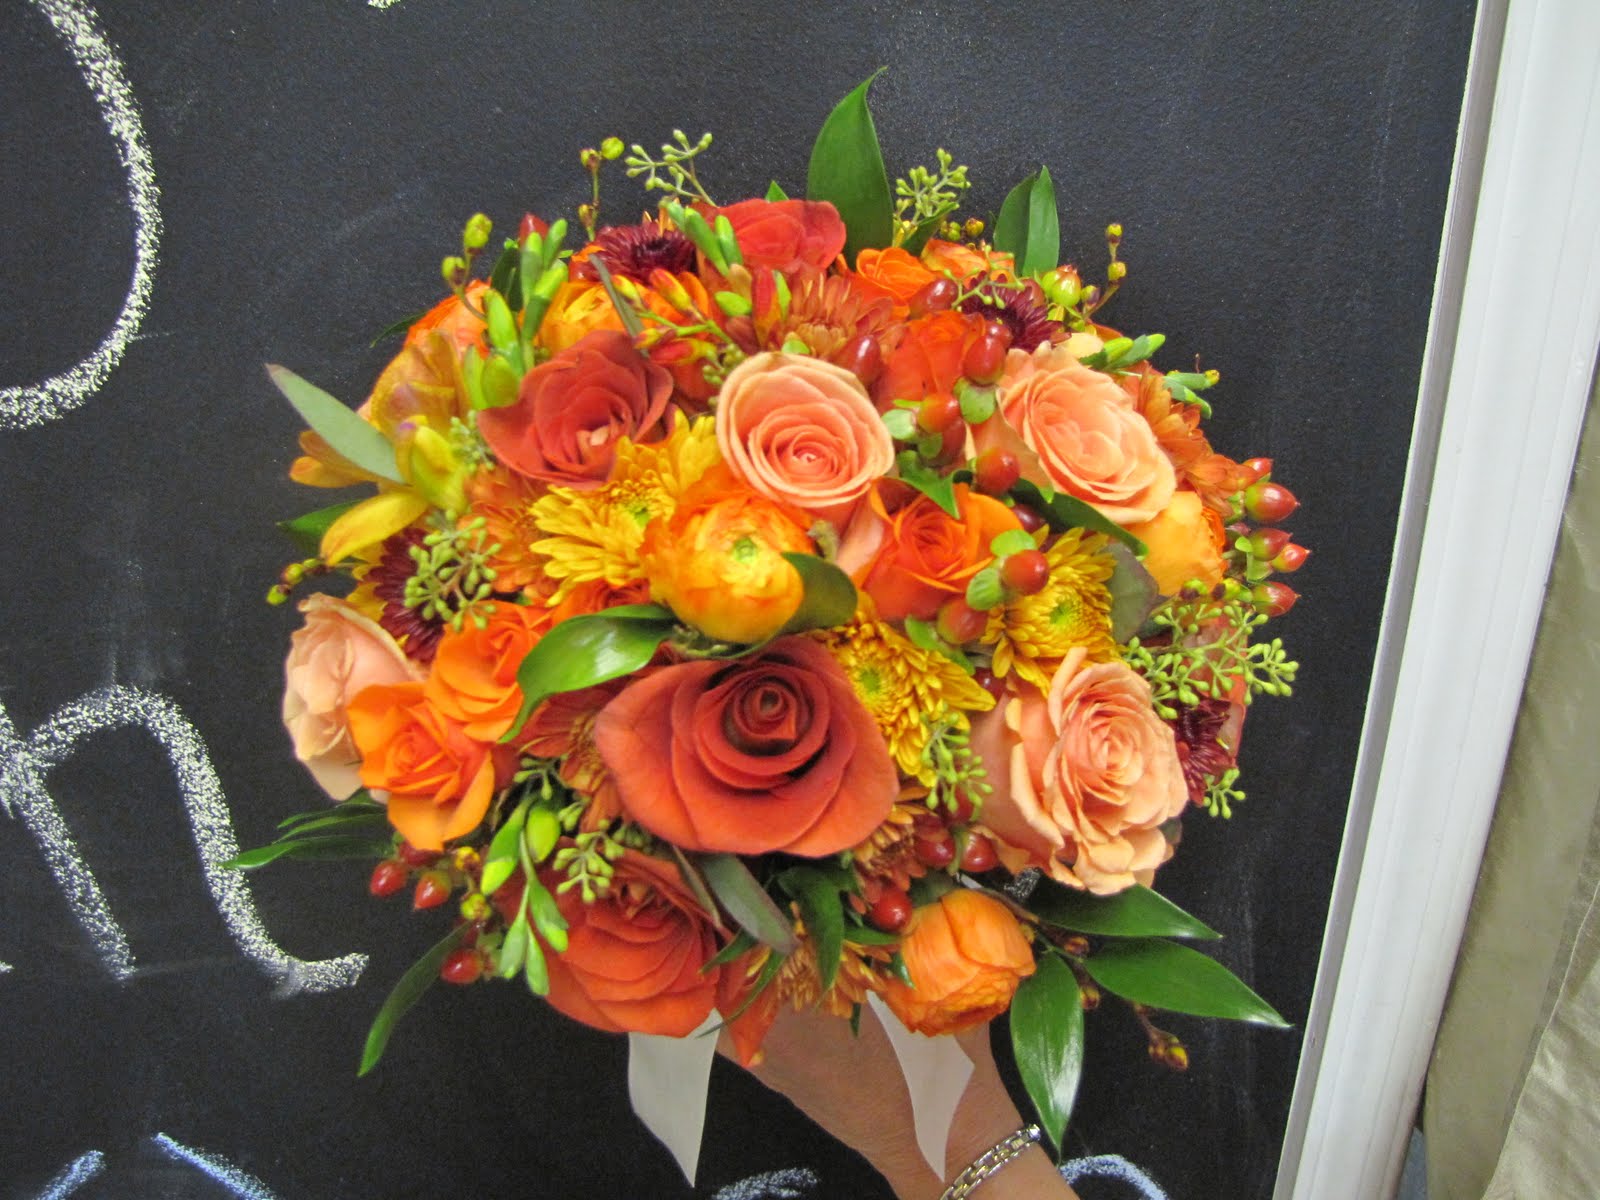 Fall wedding flowers are my